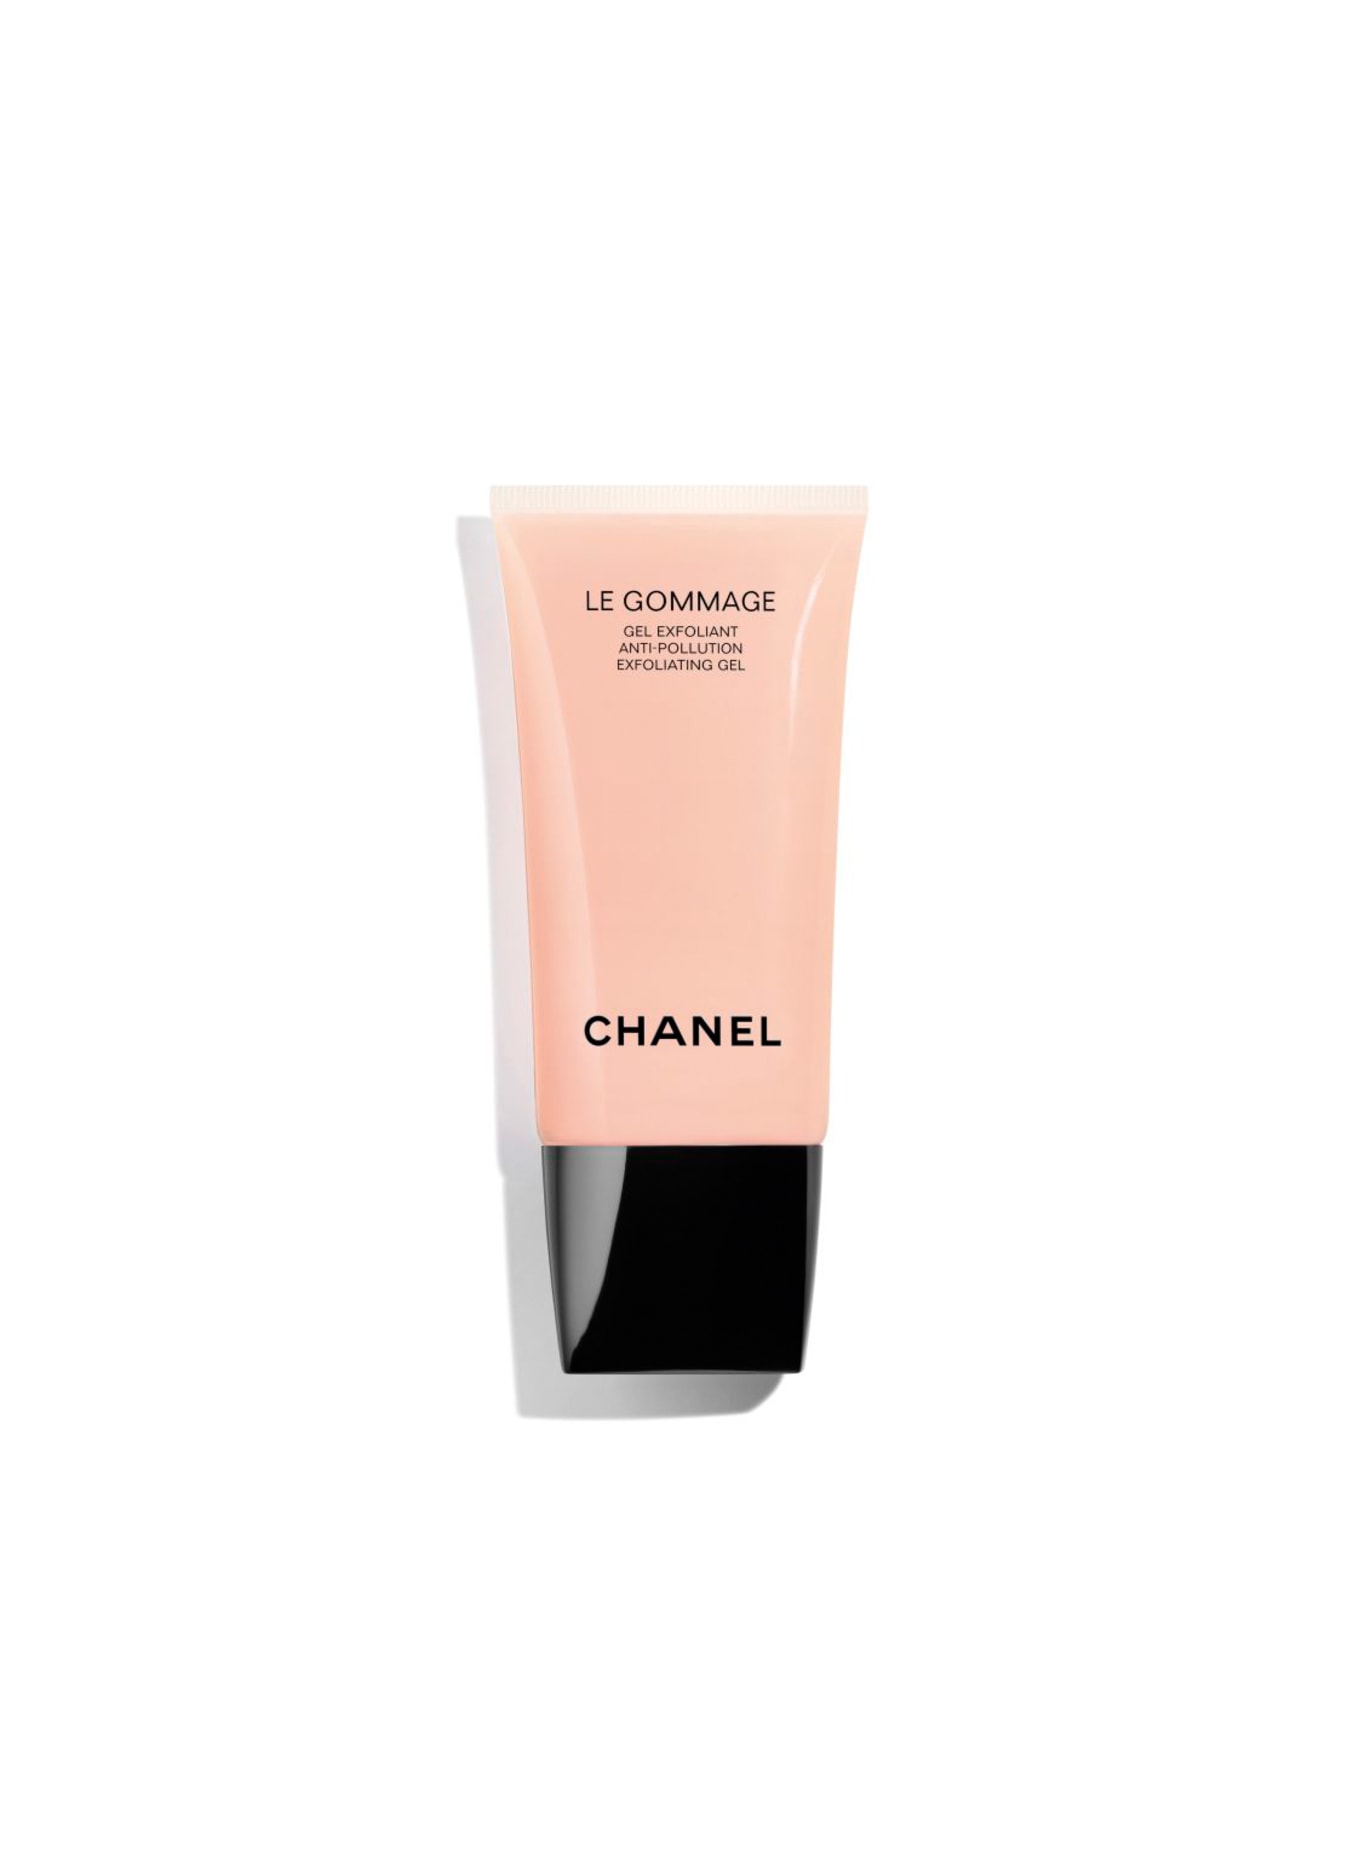 CHANEL LE GOMMAGE (Obrazek 1)